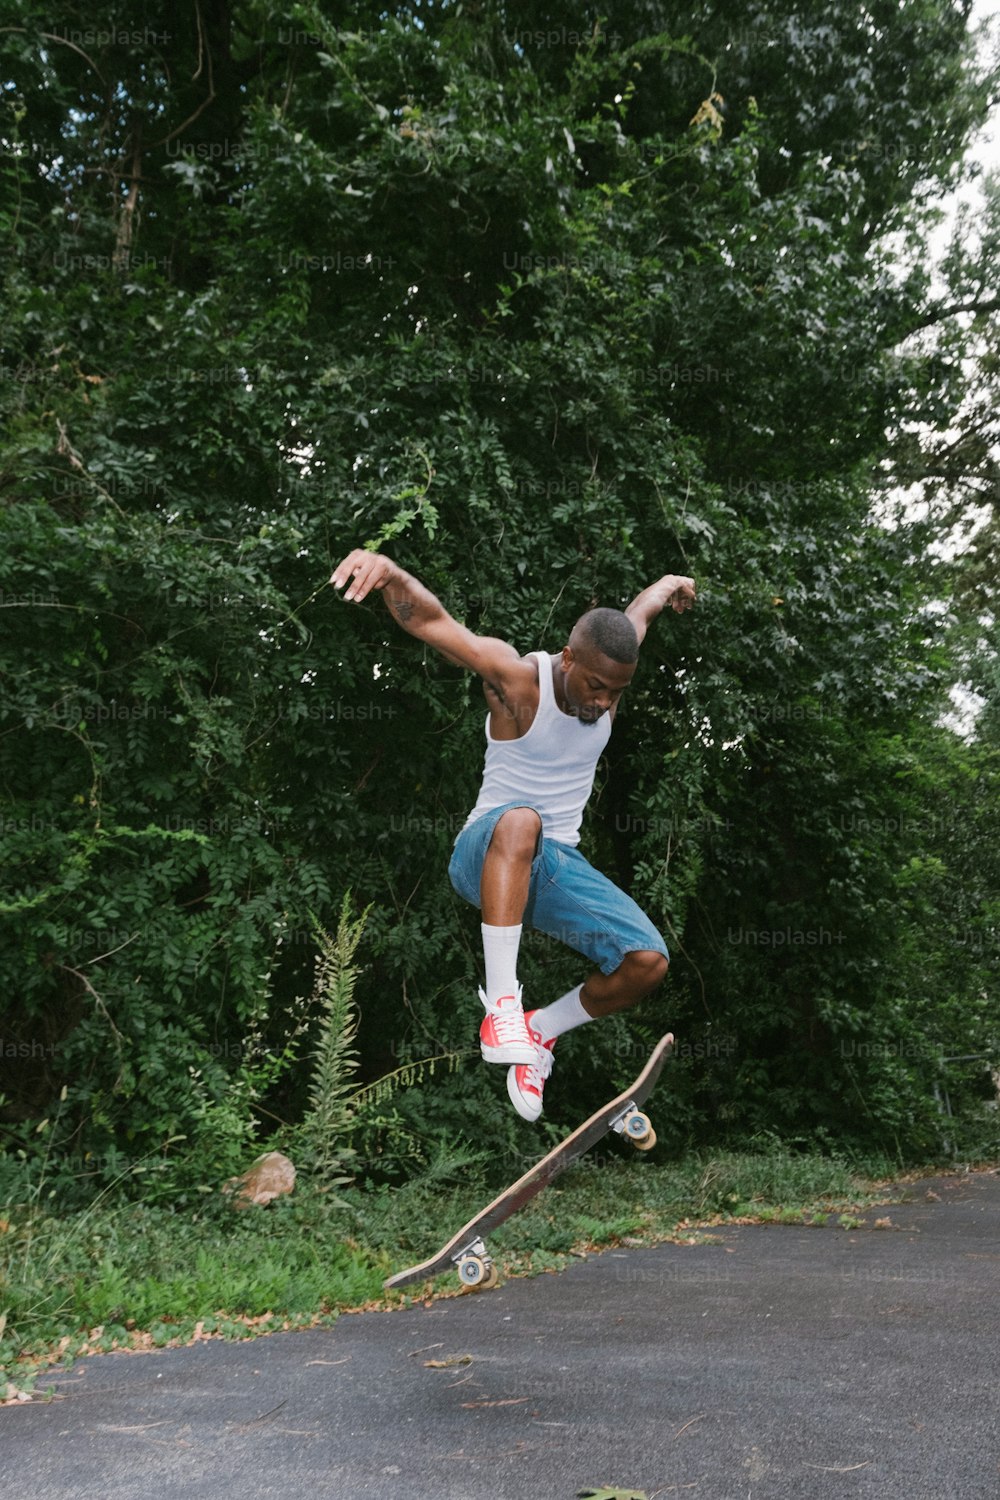 a man is doing a trick on a skateboard